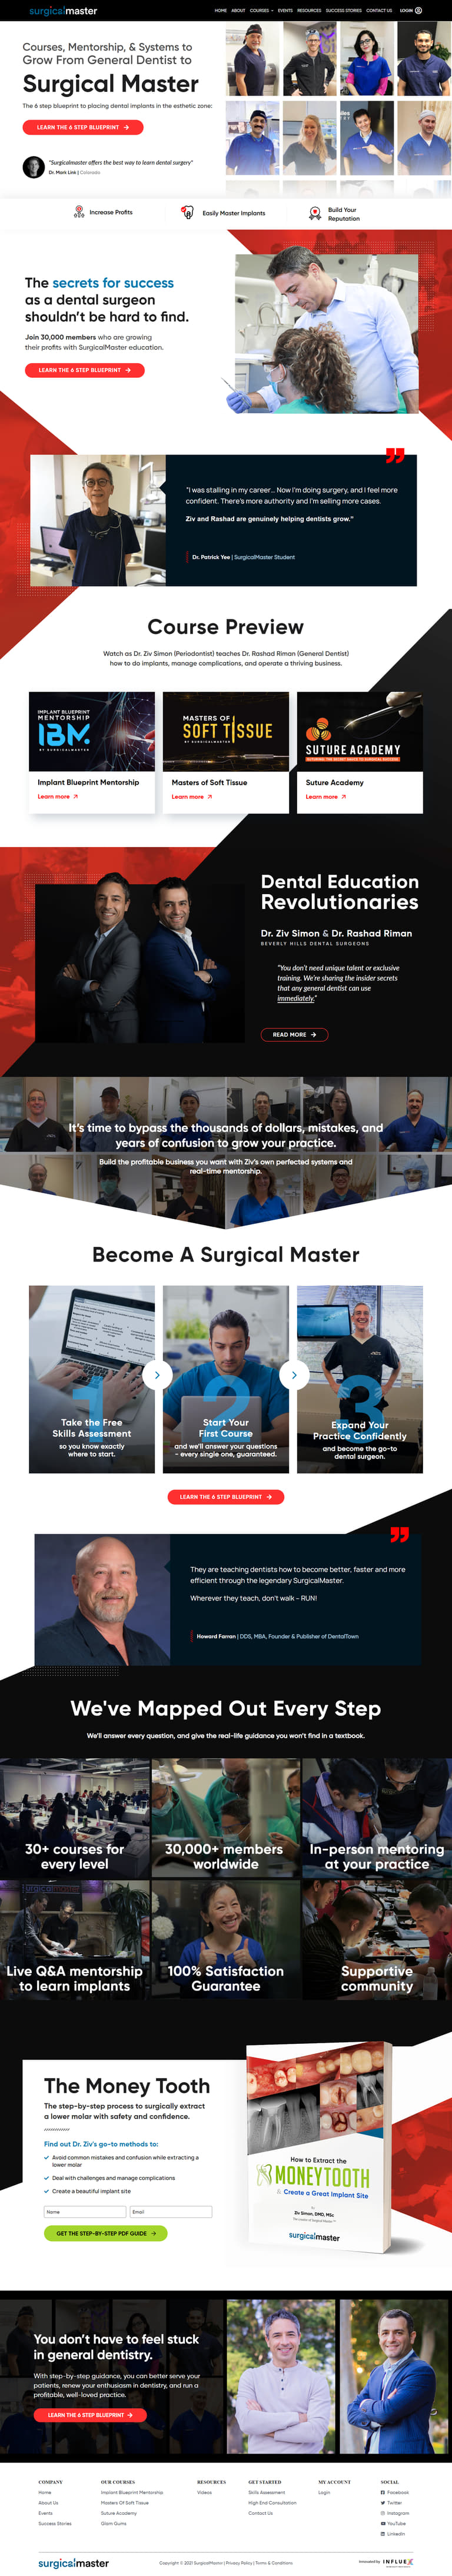 Surgical Master